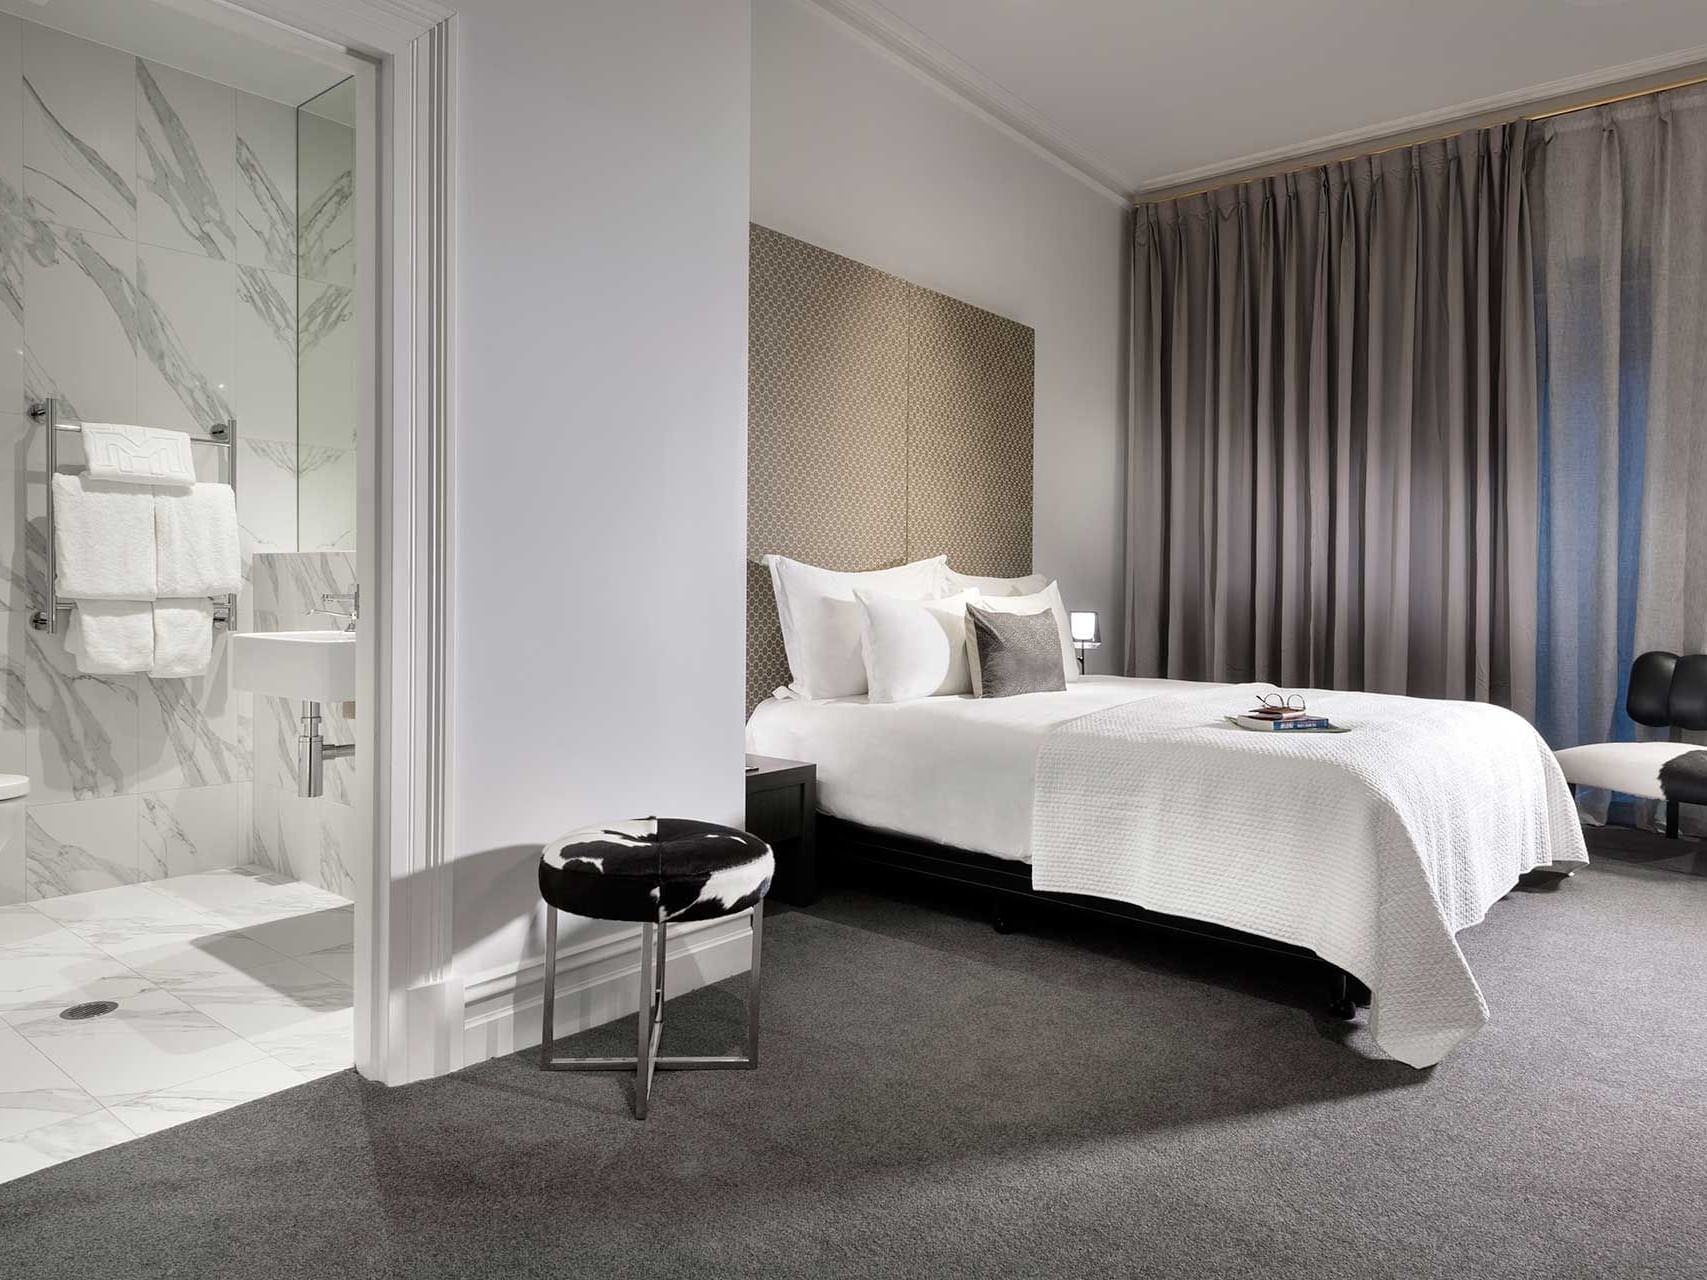 King bed by shower area in Heritage Conservatory with carpeted floors at Melbourne Hotel Perth